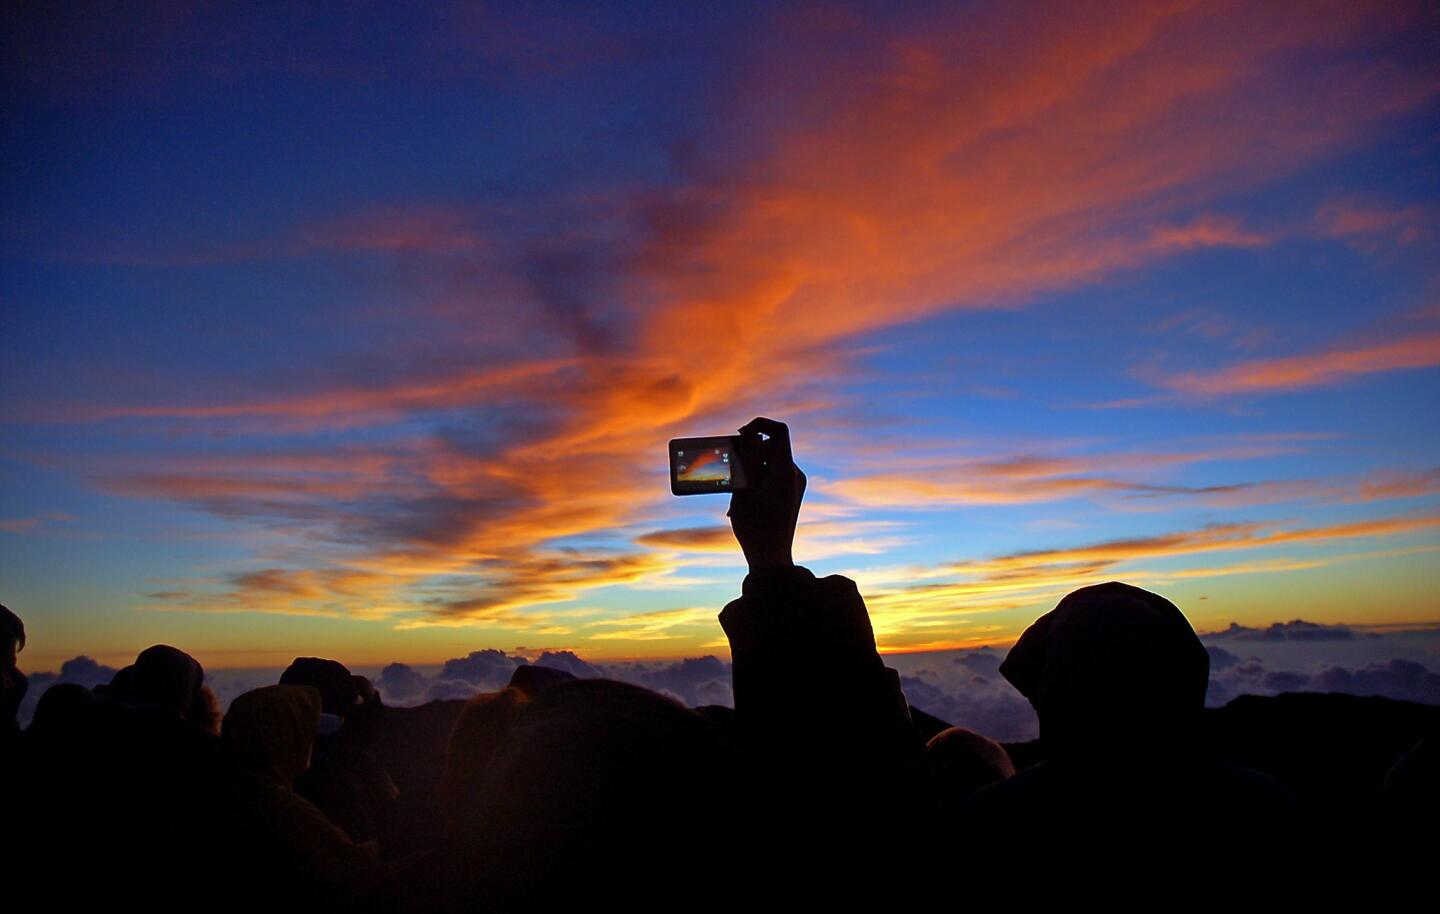 Dawn on the lip of Haleakala makes for a memorable photo op.